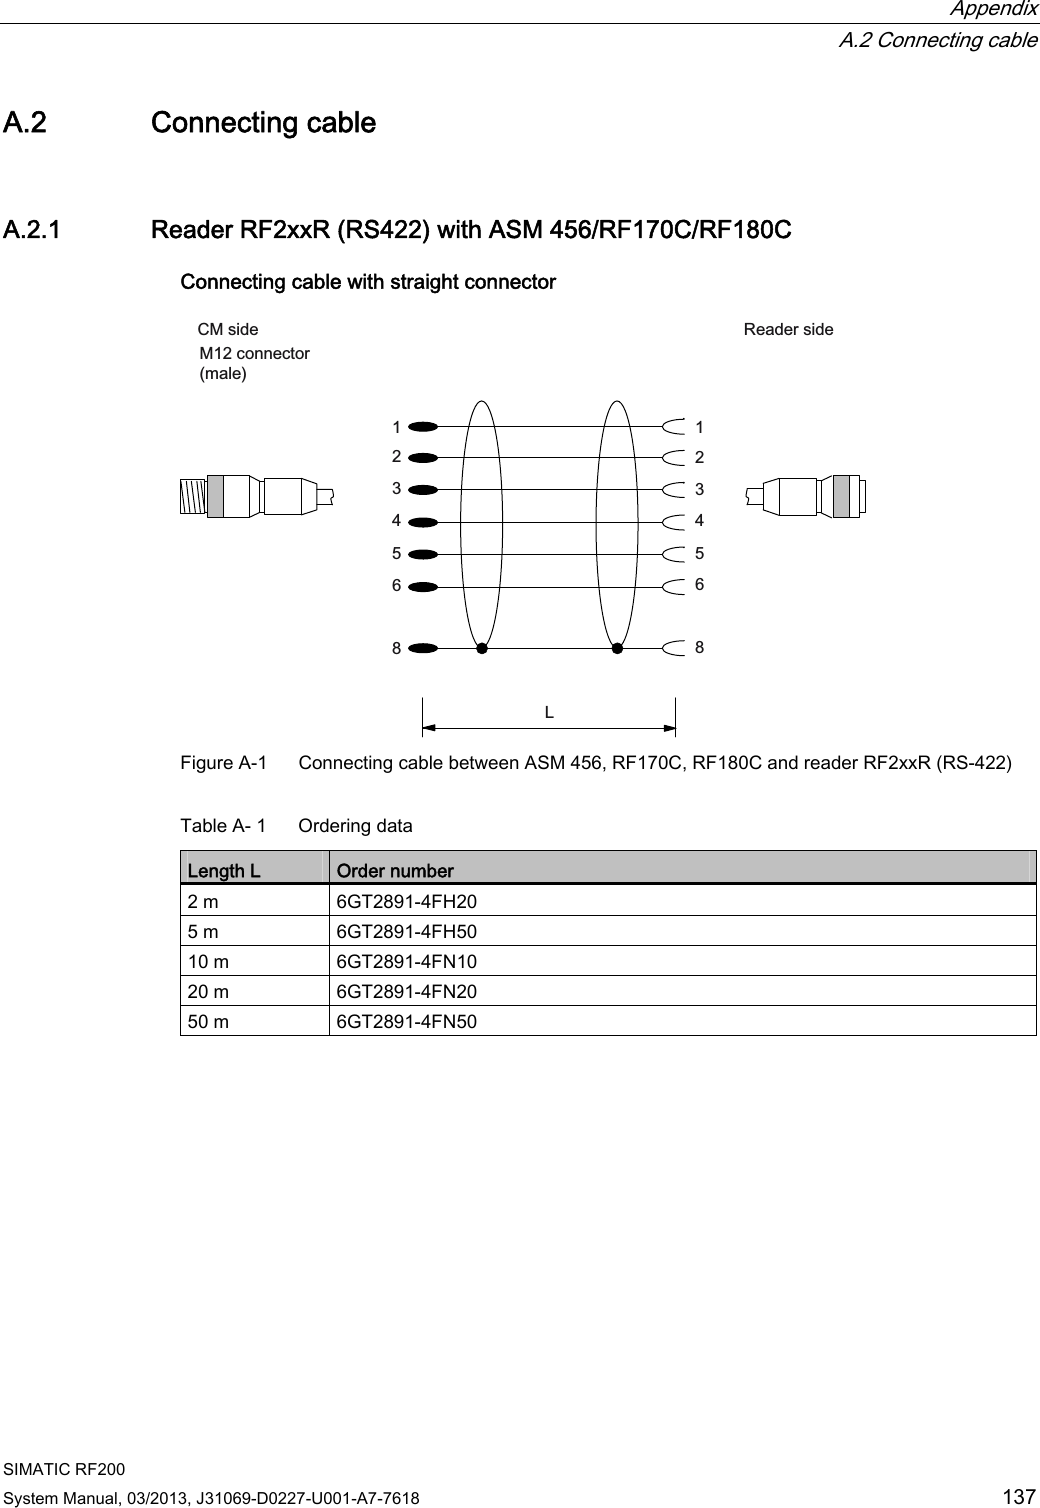  Appendix  A.2 Connecting cable SIMATIC RF200 System Manual, 03/2013, J31069-D0227-U001-A7-7618  137 A.2 Connecting cable A.2.1 Reader RF2xxR (RS422) with ASM 456/RF170C/RF180C Connecting cable with straight connector 0FRQQHFWRUPDOH5HDGHUVLGH&amp;0VLGH/ Figure A-1  Connecting cable between ASM 456, RF170C, RF180C and reader RF2xxR (RS-422) Table A- 1  Ordering data Length L  Order number 2 m  6GT2891-4FH20 5 m  6GT2891-4FH50 10 m  6GT2891-4FN10 20 m  6GT2891-4FN20 50 m  6GT2891-4FN50   